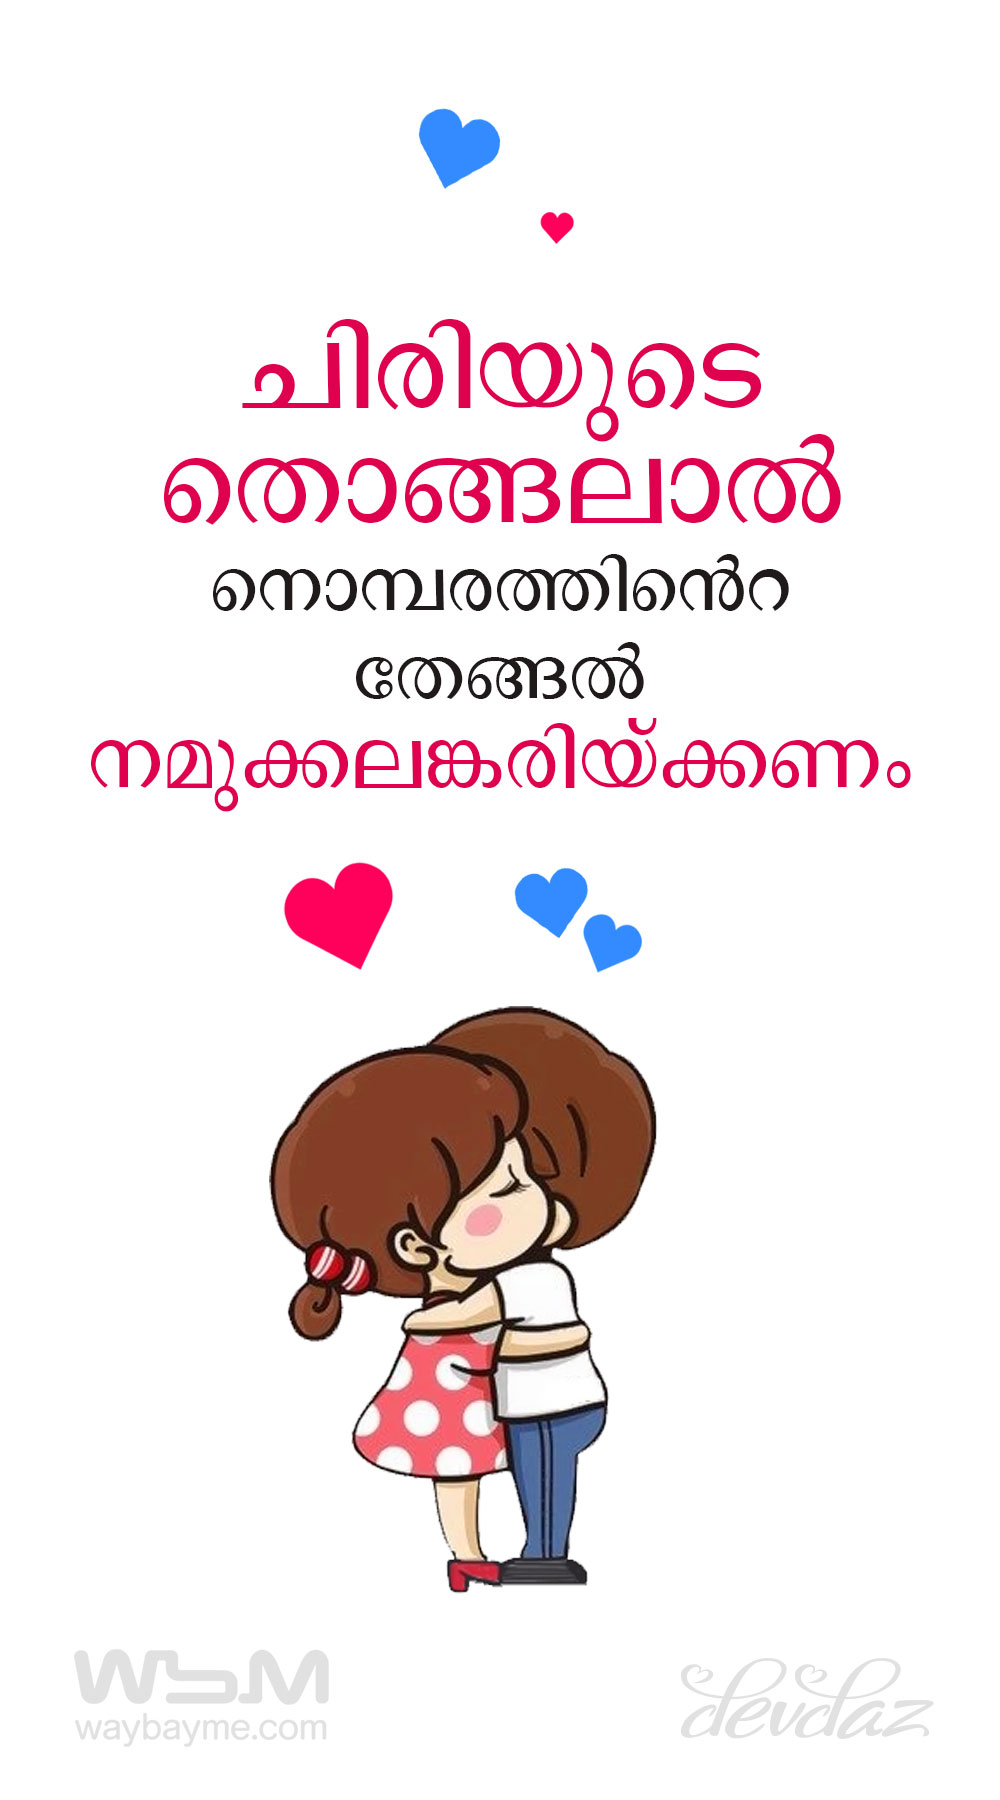 malayalam love quotes, motivational quotes in malayalam, friendship quotes in malayalam, malayalam captions for instagram, malayalam love quotes text, love quotes in malayalam for husband, love quotes english text, love thoughts english, loving words in malayalam, propose day malayalam quotes, malayalam love letter, malayalam status in english, love quotes malayalam facebook, love quotes malayalam text, romantic love quotes, love quotes for him, pranayam images malayalam, love captions english, malayalam status love, sad love images in malayalam, pranaya dialogues malayalam, alone malayalam quotes, Malayalam pranayama, pranaya kathakal,pranayam